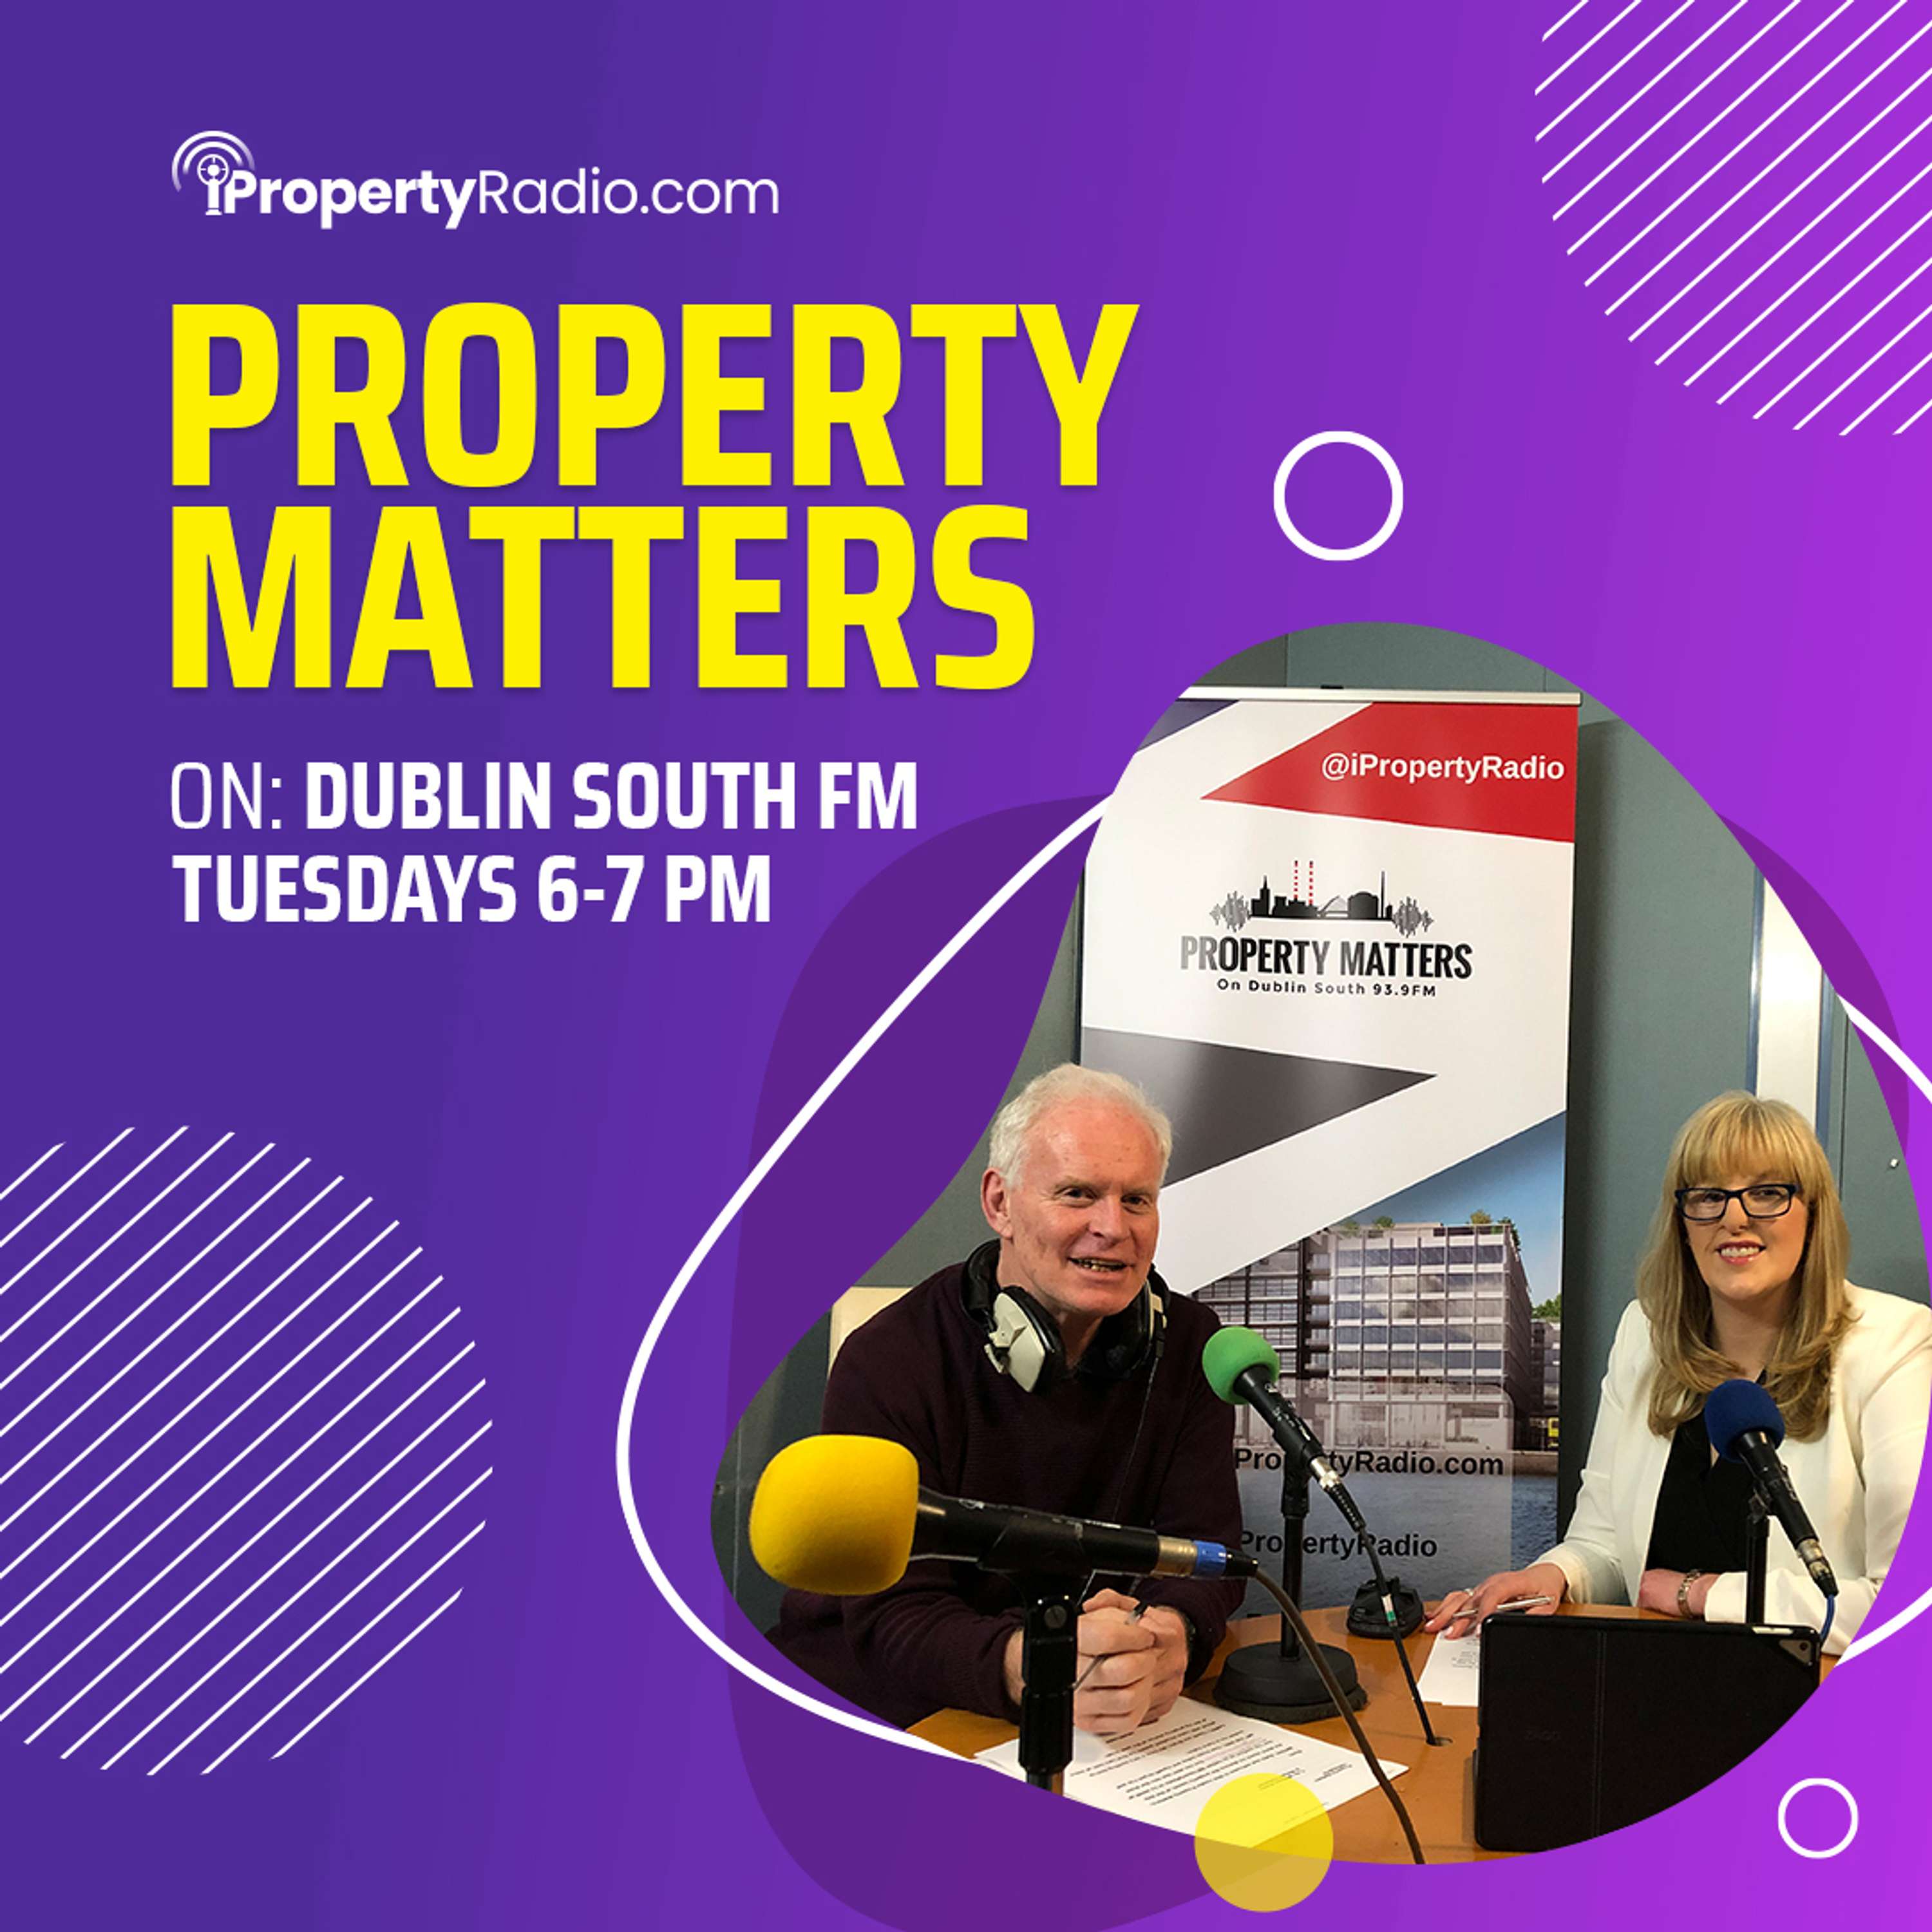 Property Matters: Bryan Fox hosts political guests to discuss the Central Mental Hospital redevelopment